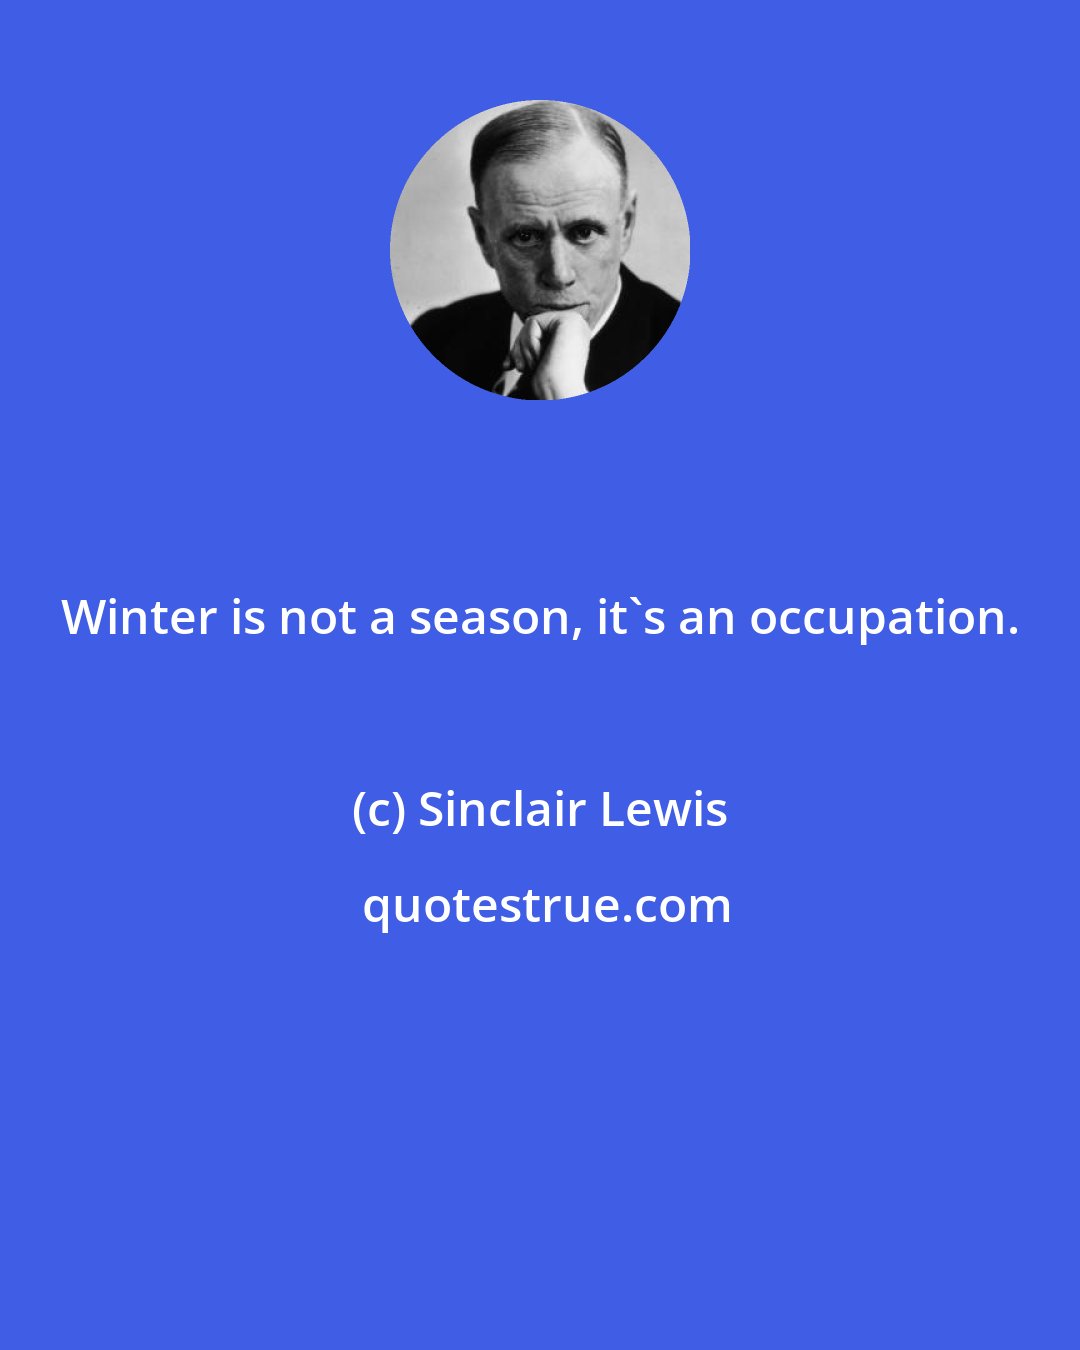 Sinclair Lewis: Winter is not a season, it's an occupation.